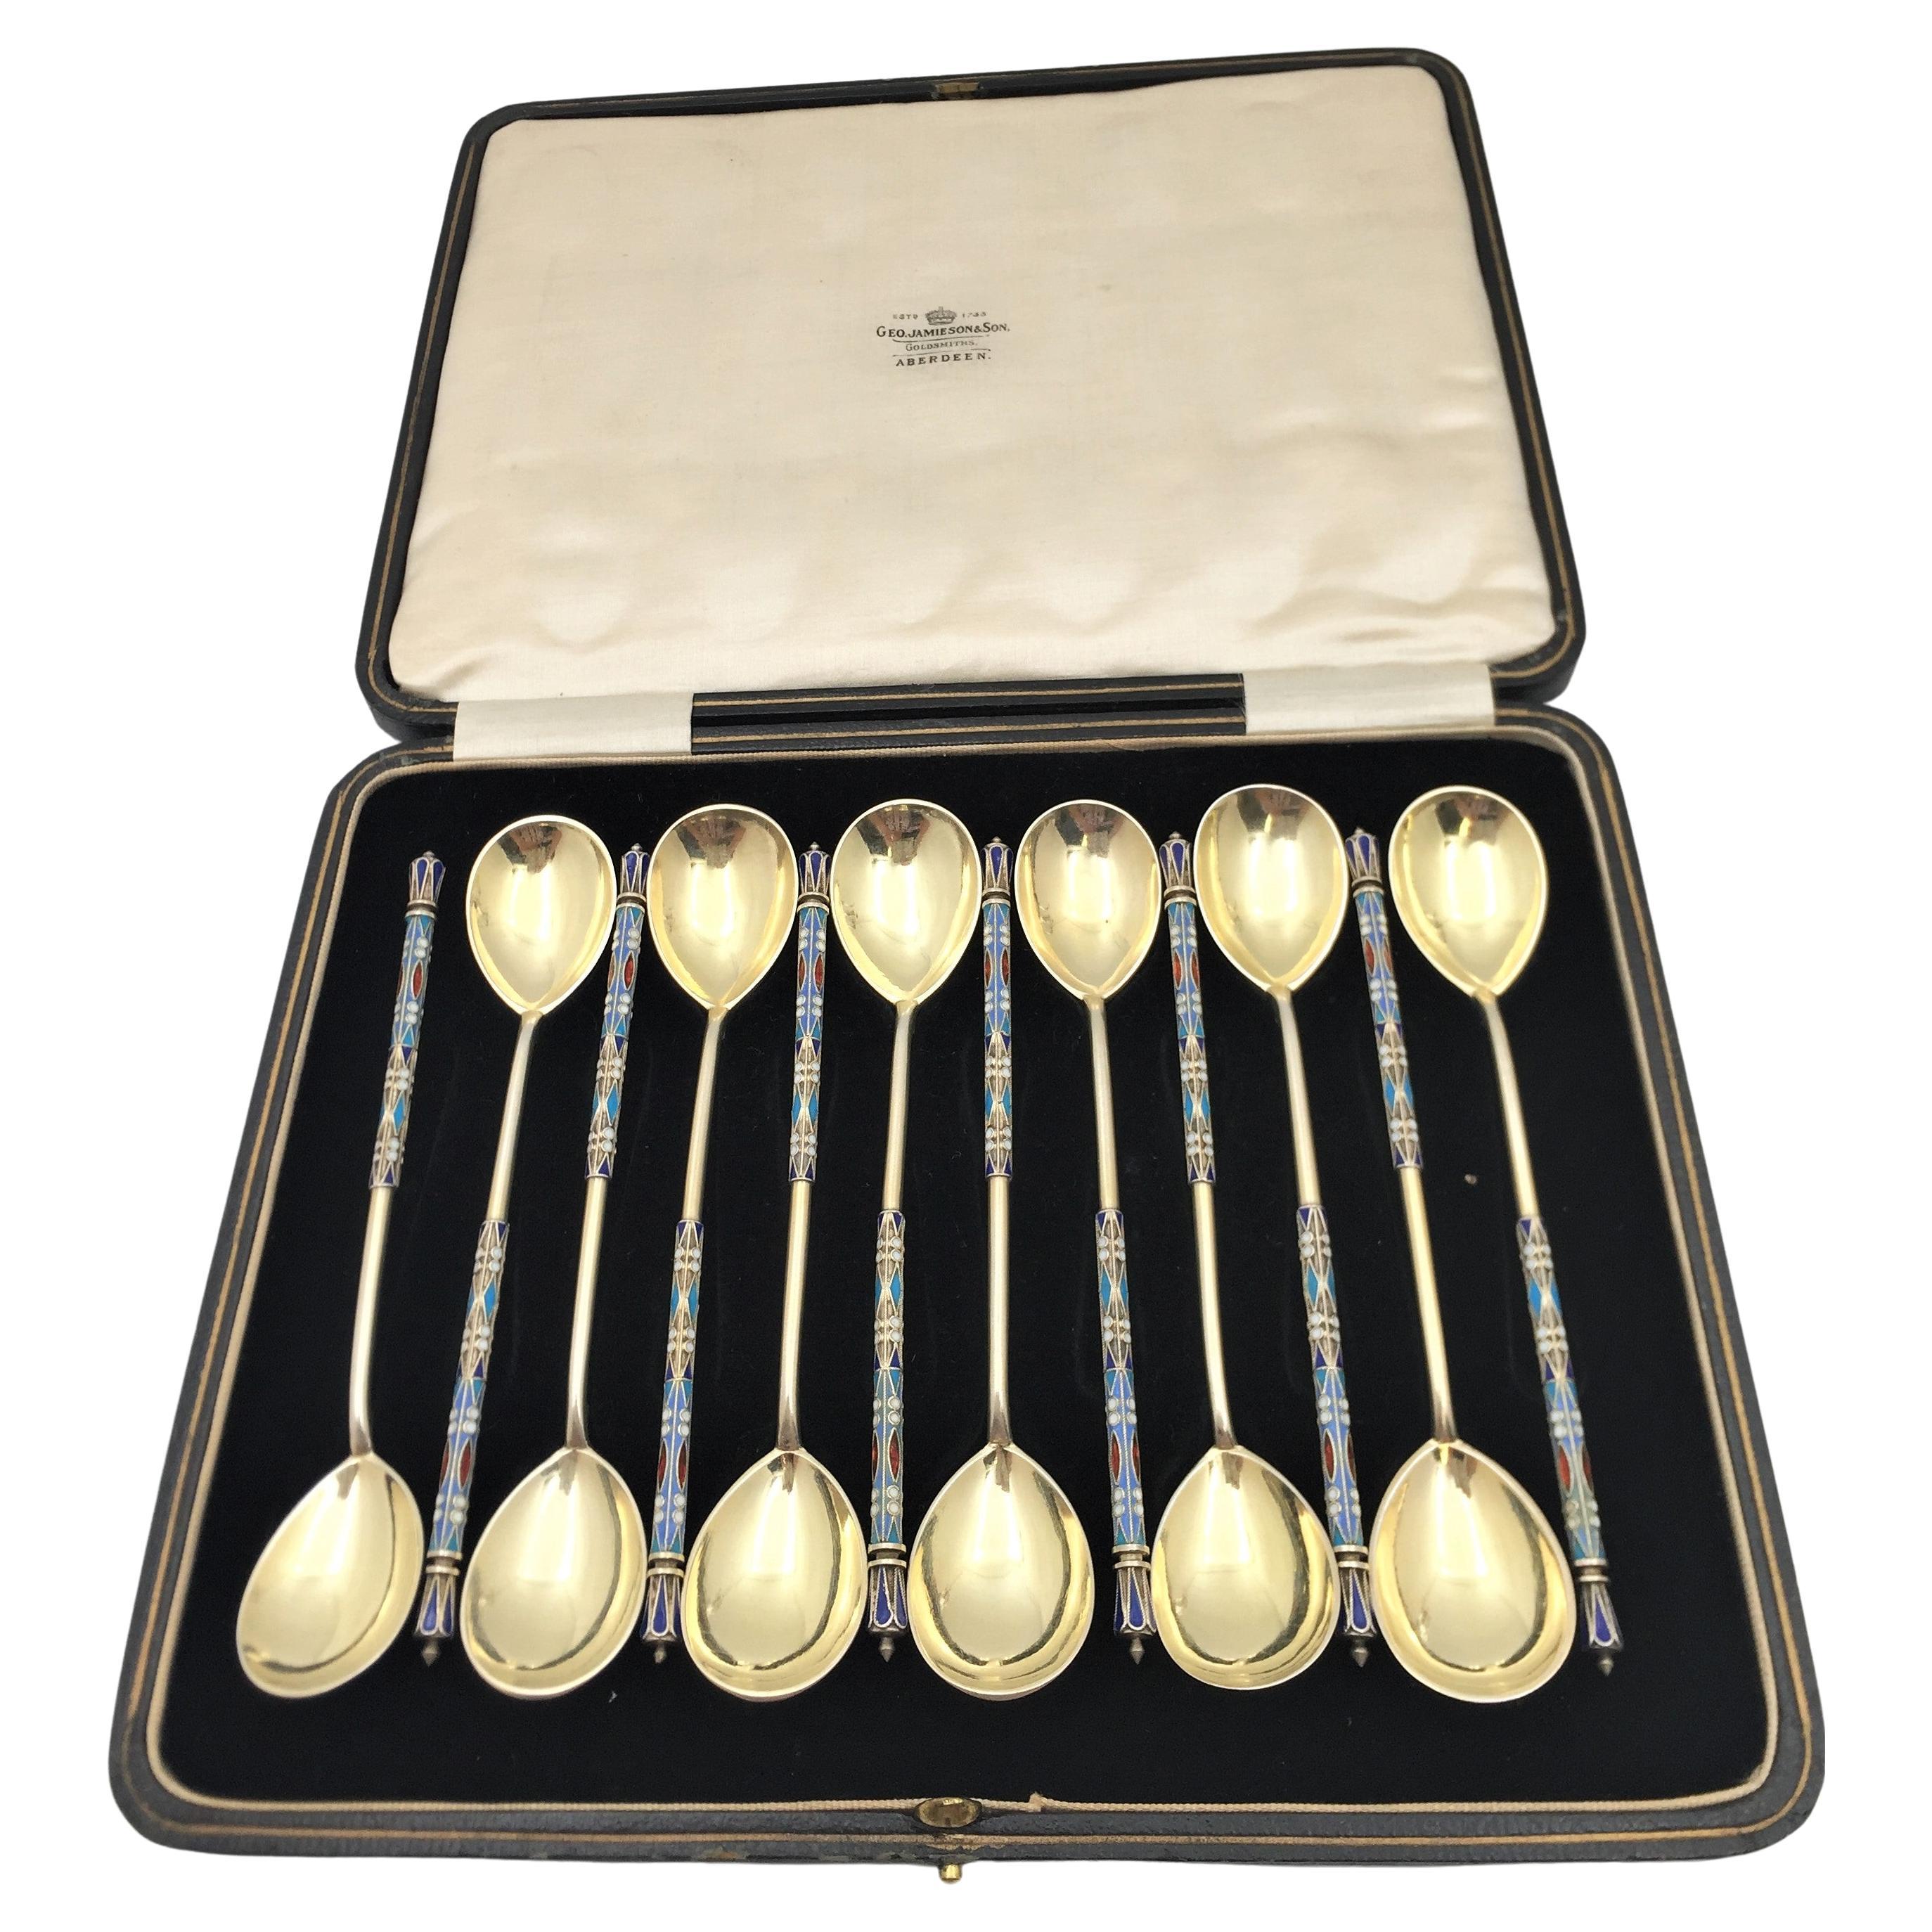 Ivan Saltykov Set of 12 Gilt Russian Silver and Enamel Spoons in Faberge Style